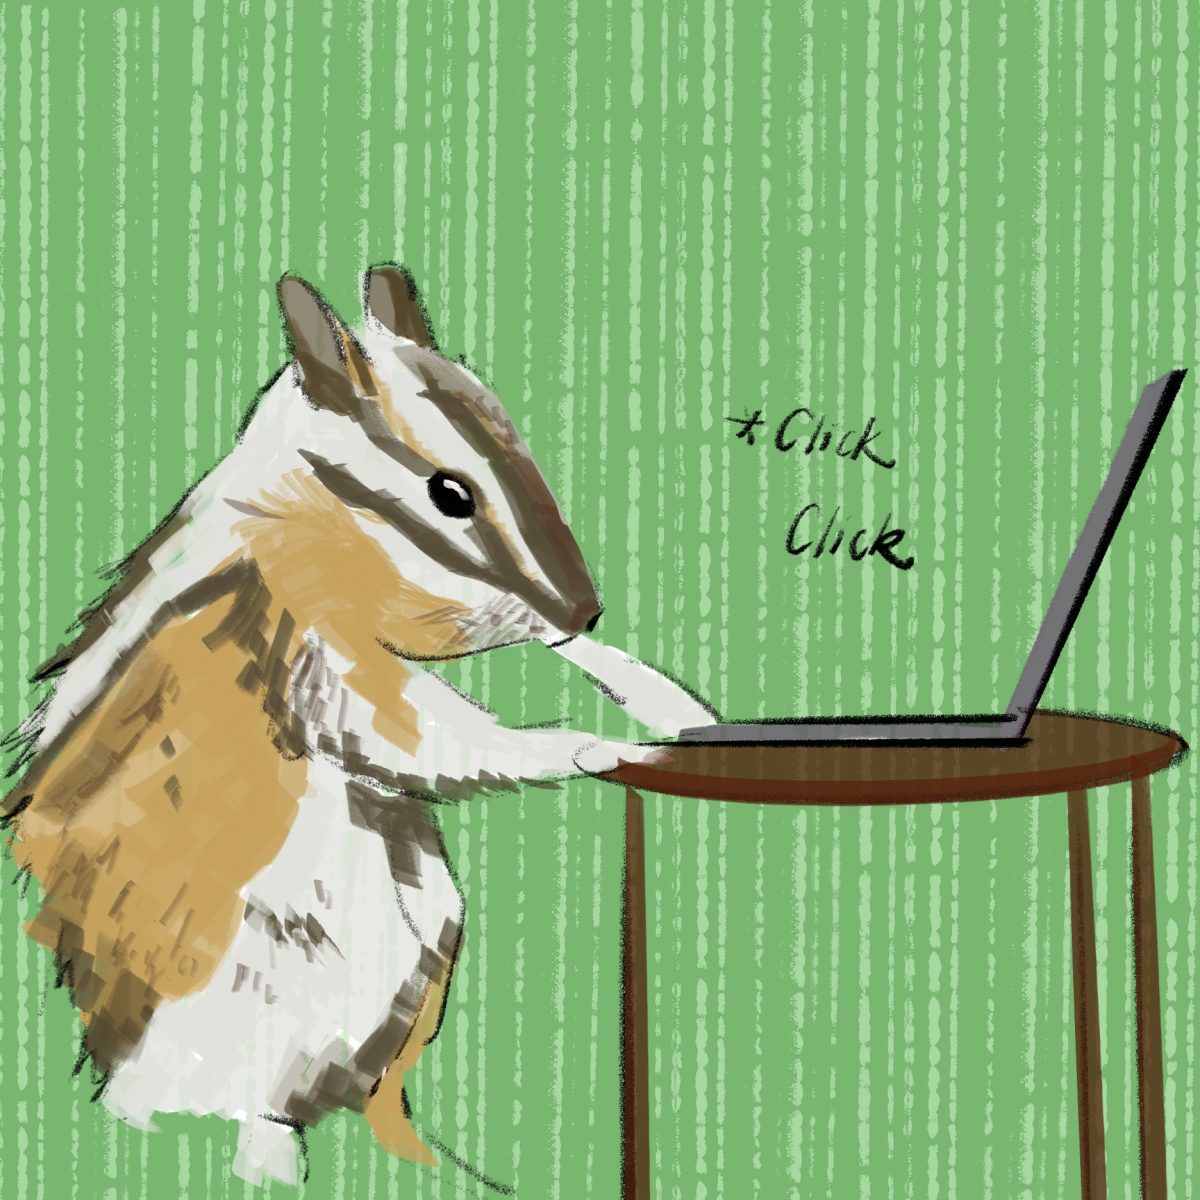 UT computer science researchers develop Chipmunk system to ensure file systems’ integrity